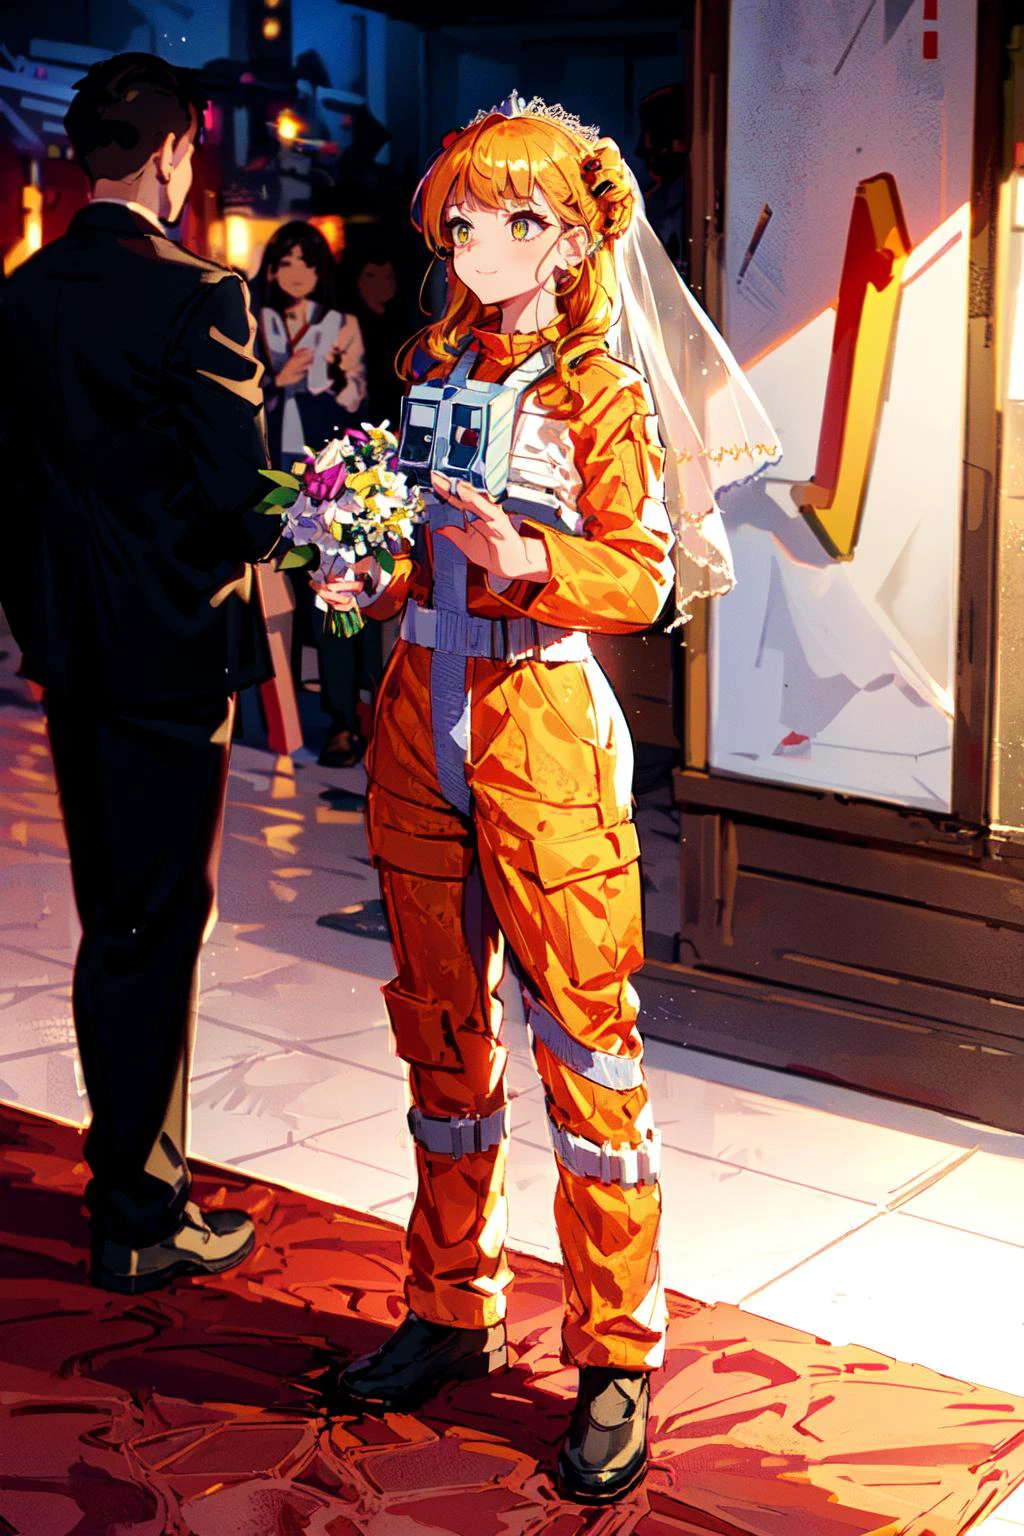 (best quality, masterpiece:1.1), (Intricate detailed:1.2),   ((full body, dynamic angle,     1girl, easygoing face, yellow hair, asymmetrical bangs, wavy hair, cornrows,  quin tails,  intricate hair ornaments, in  orange (rebel pilot suit:1.2) BREAK ( (Wedding ceremony), ceremony, marriage, flowers) in the background,  ):0.8)